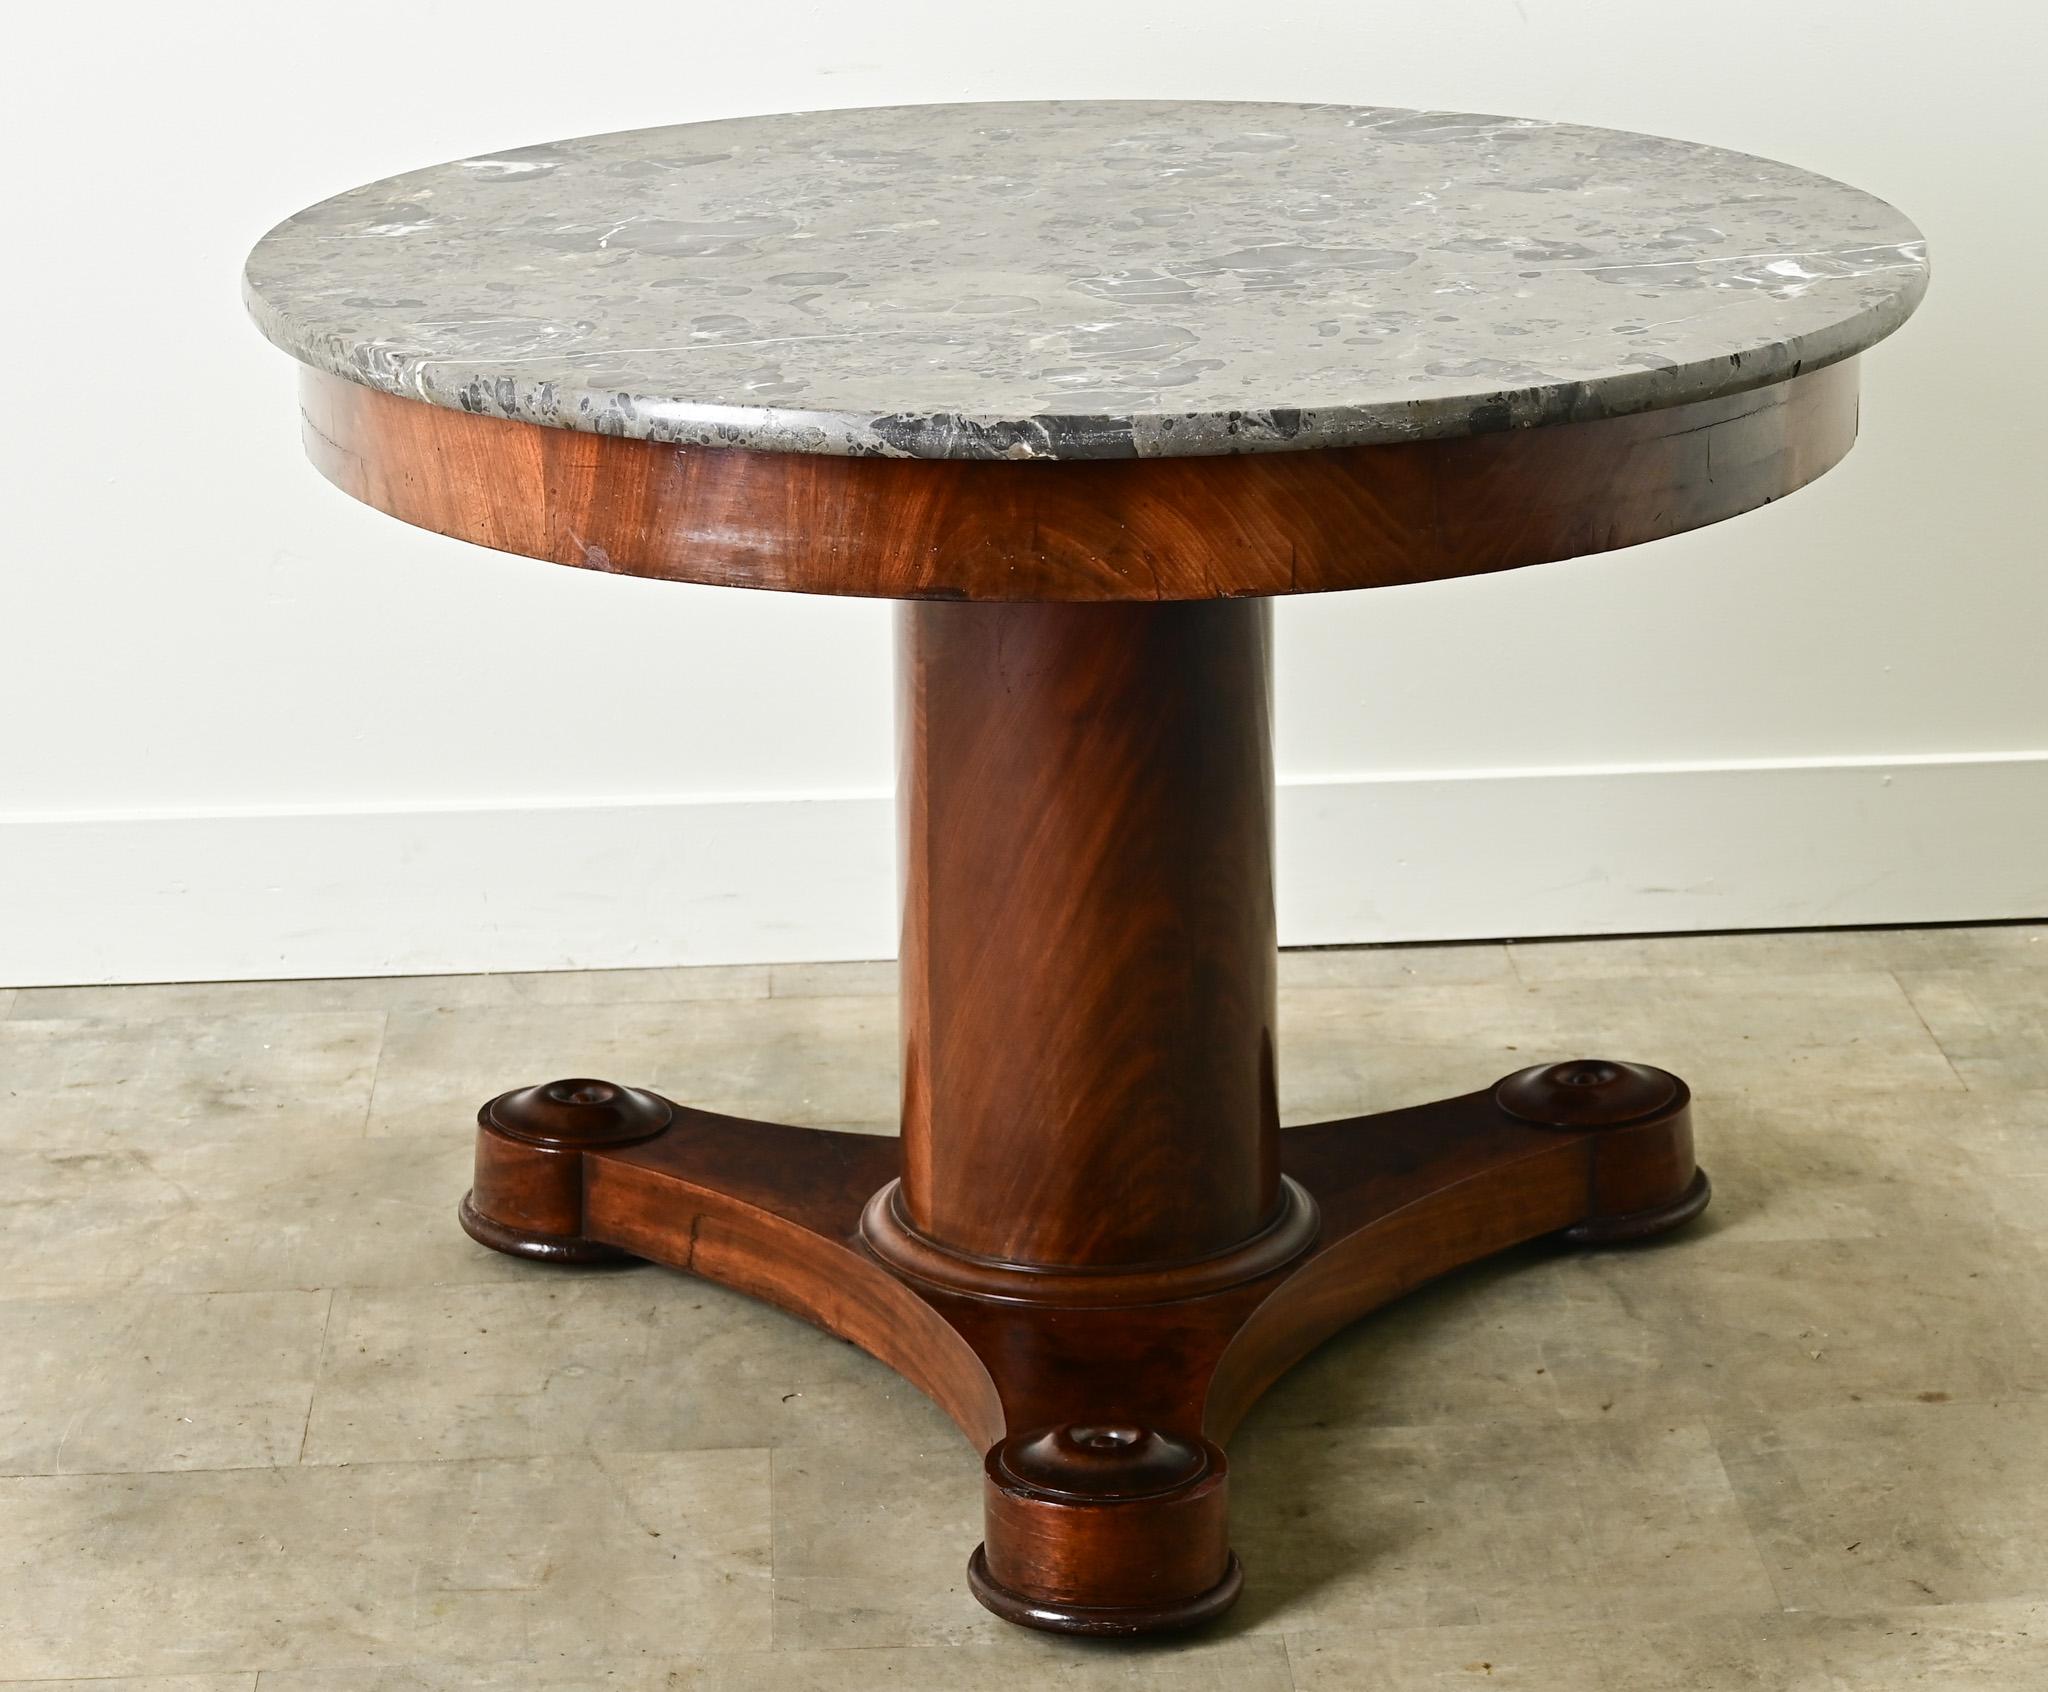 A large round center table from 1800’s France. The original marble top is worn and colorful over its refined mahogany base. A simple apron sits over a column form center pedestal over three concave splayed legs ending with rounded feet. Cleaned and